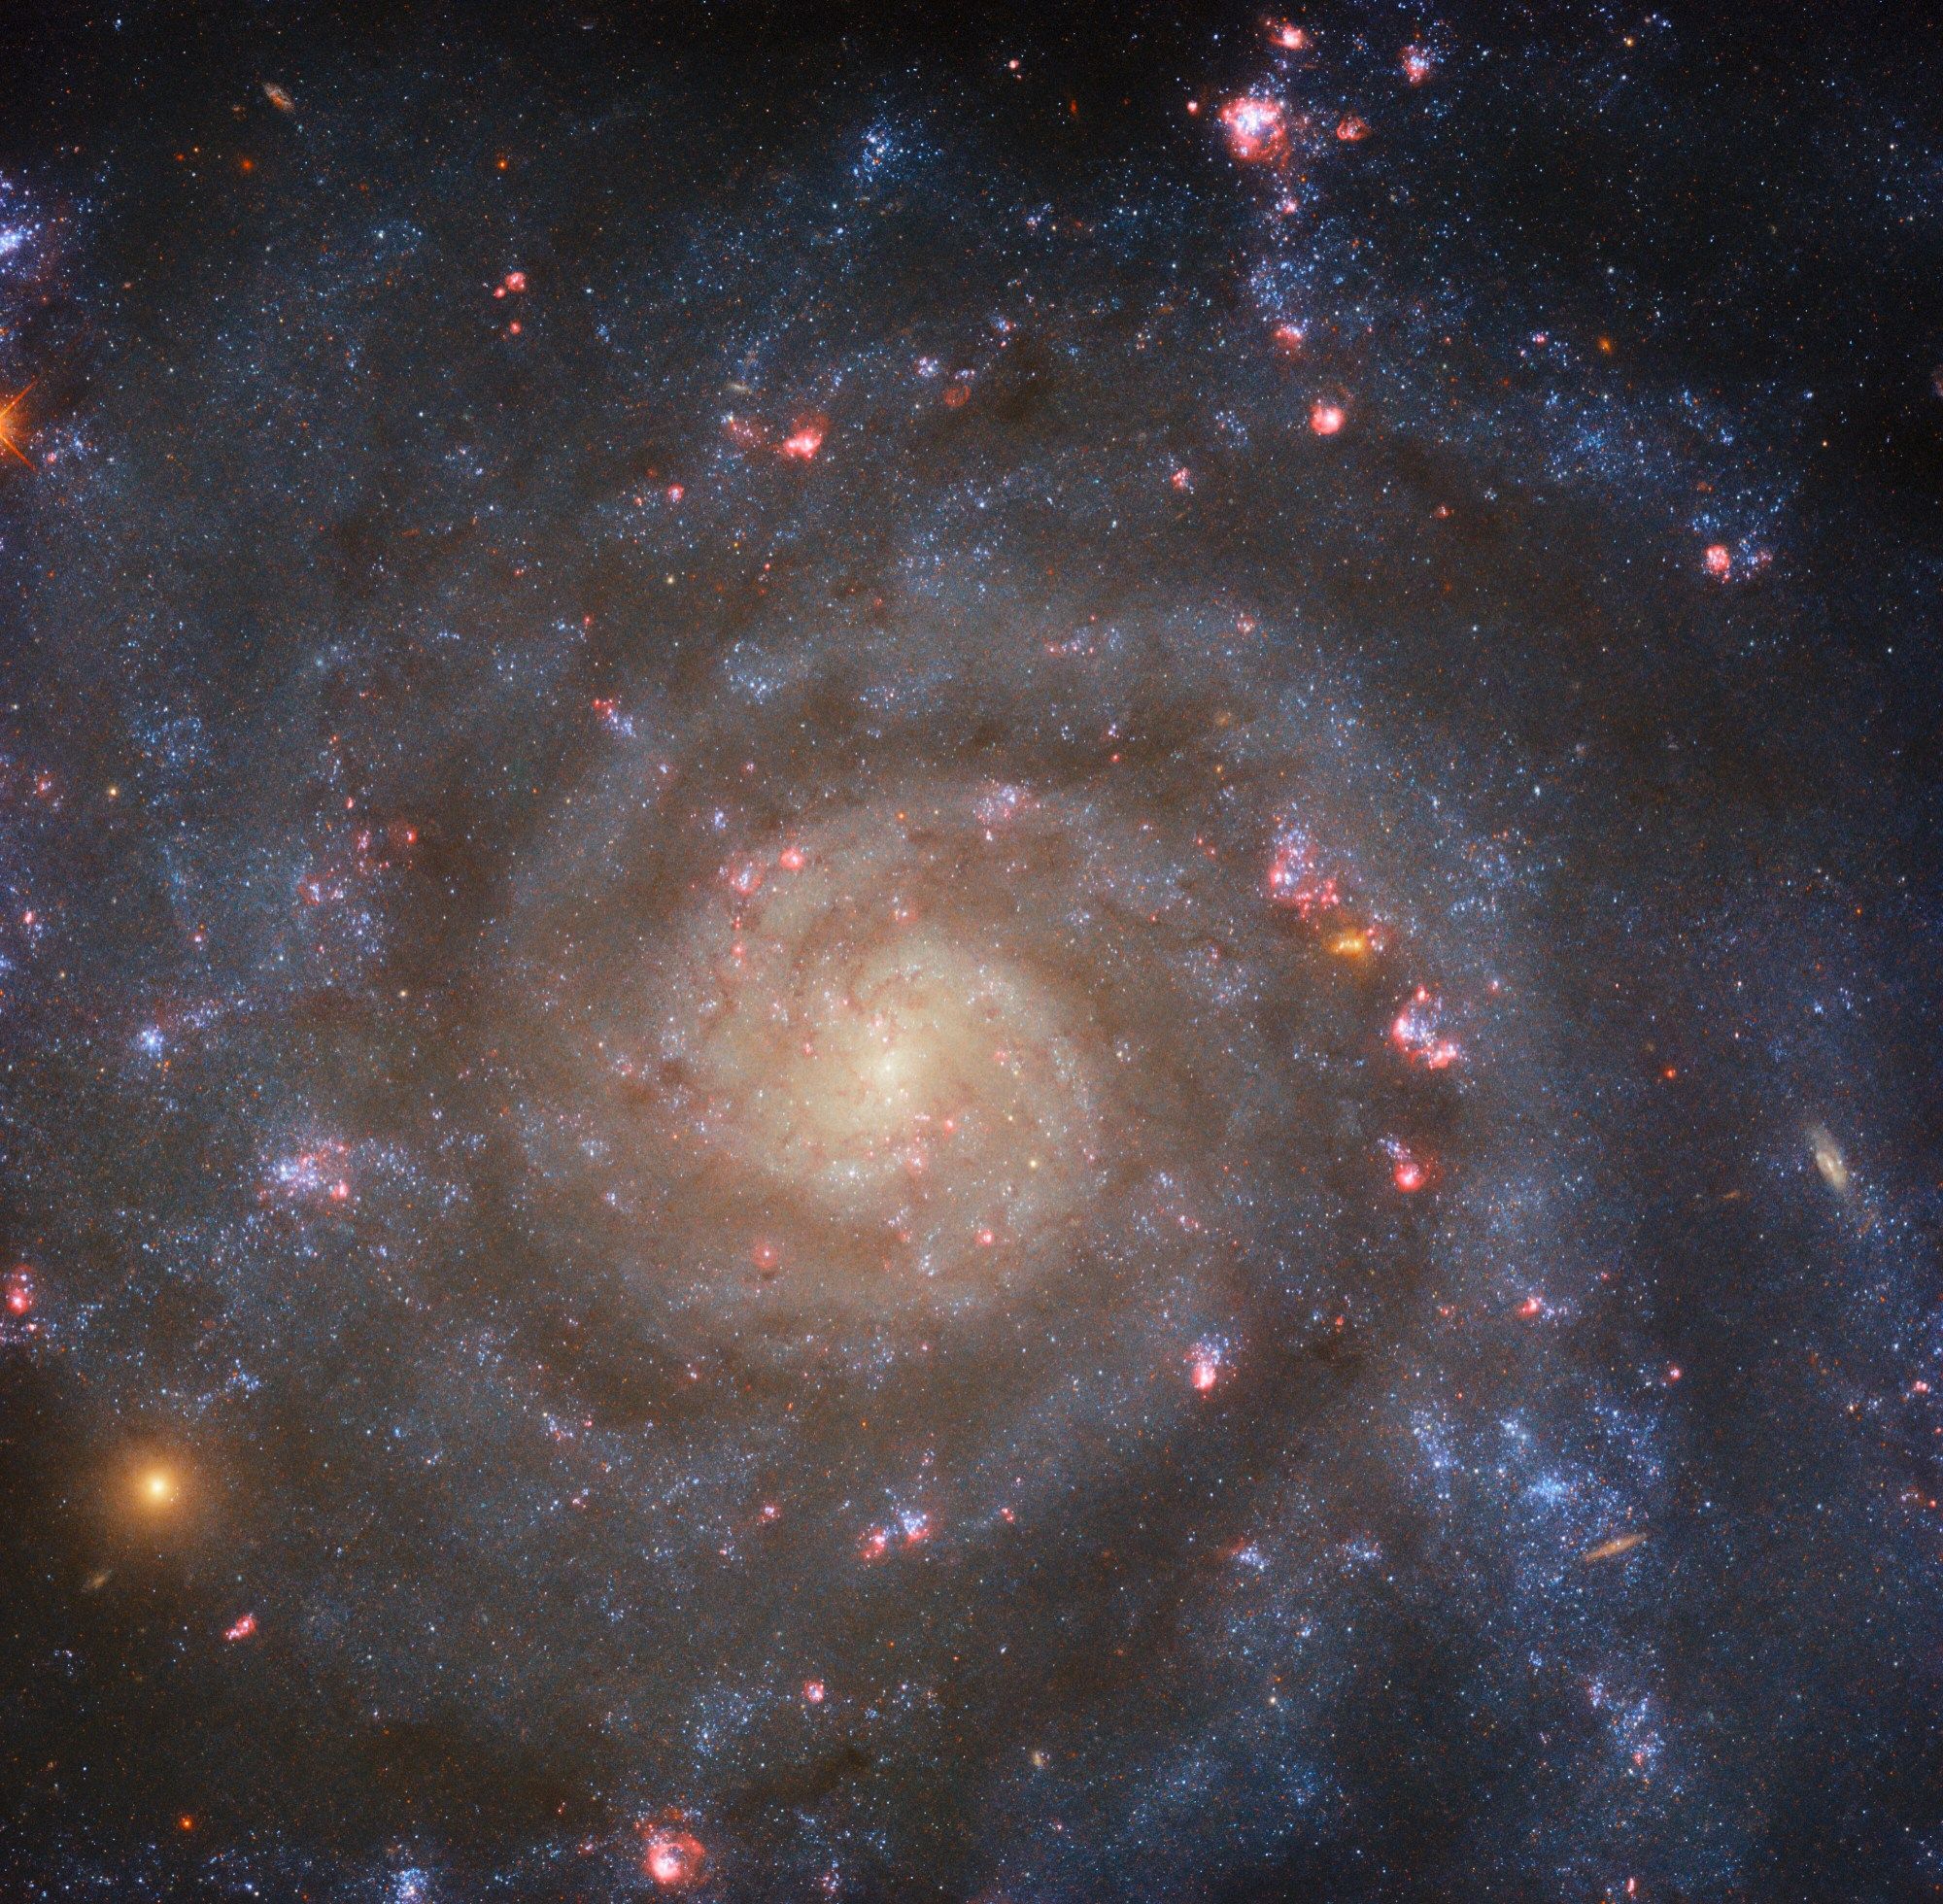 A close-in view of a spiral galaxy. We see it face-on, showing its circular shape and tightly winding spiral arms. The galaxy glows brightly in the center and dims to cool colors toward the edge. Dark, faint filaments of dust and brightly glowing pink and orange bubbles of star formation mark the face of the galaxy.